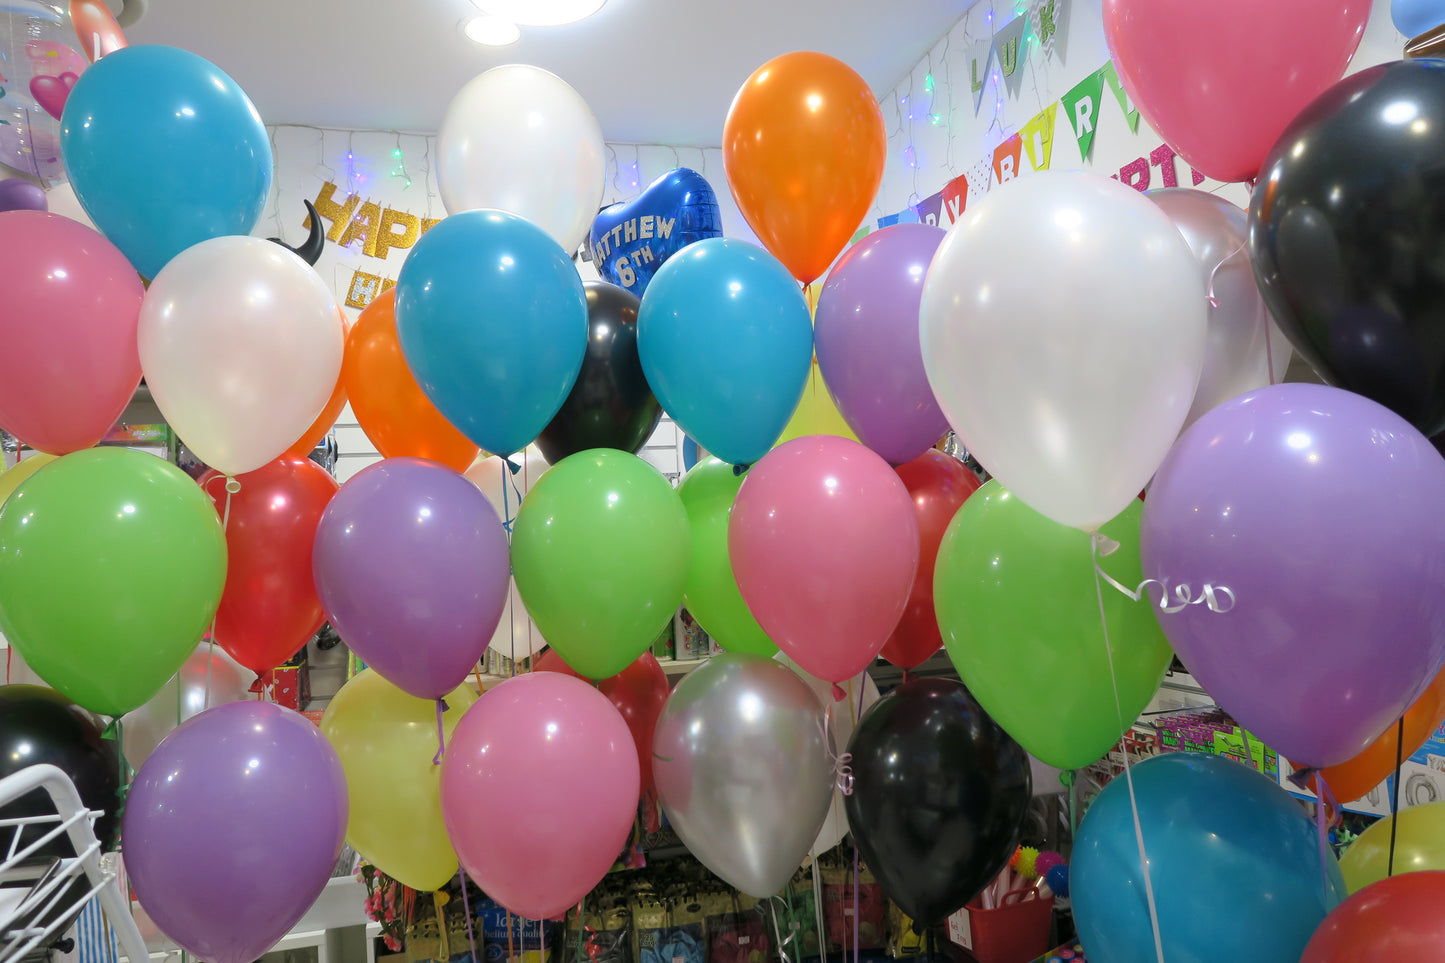 200 ceiling balloons